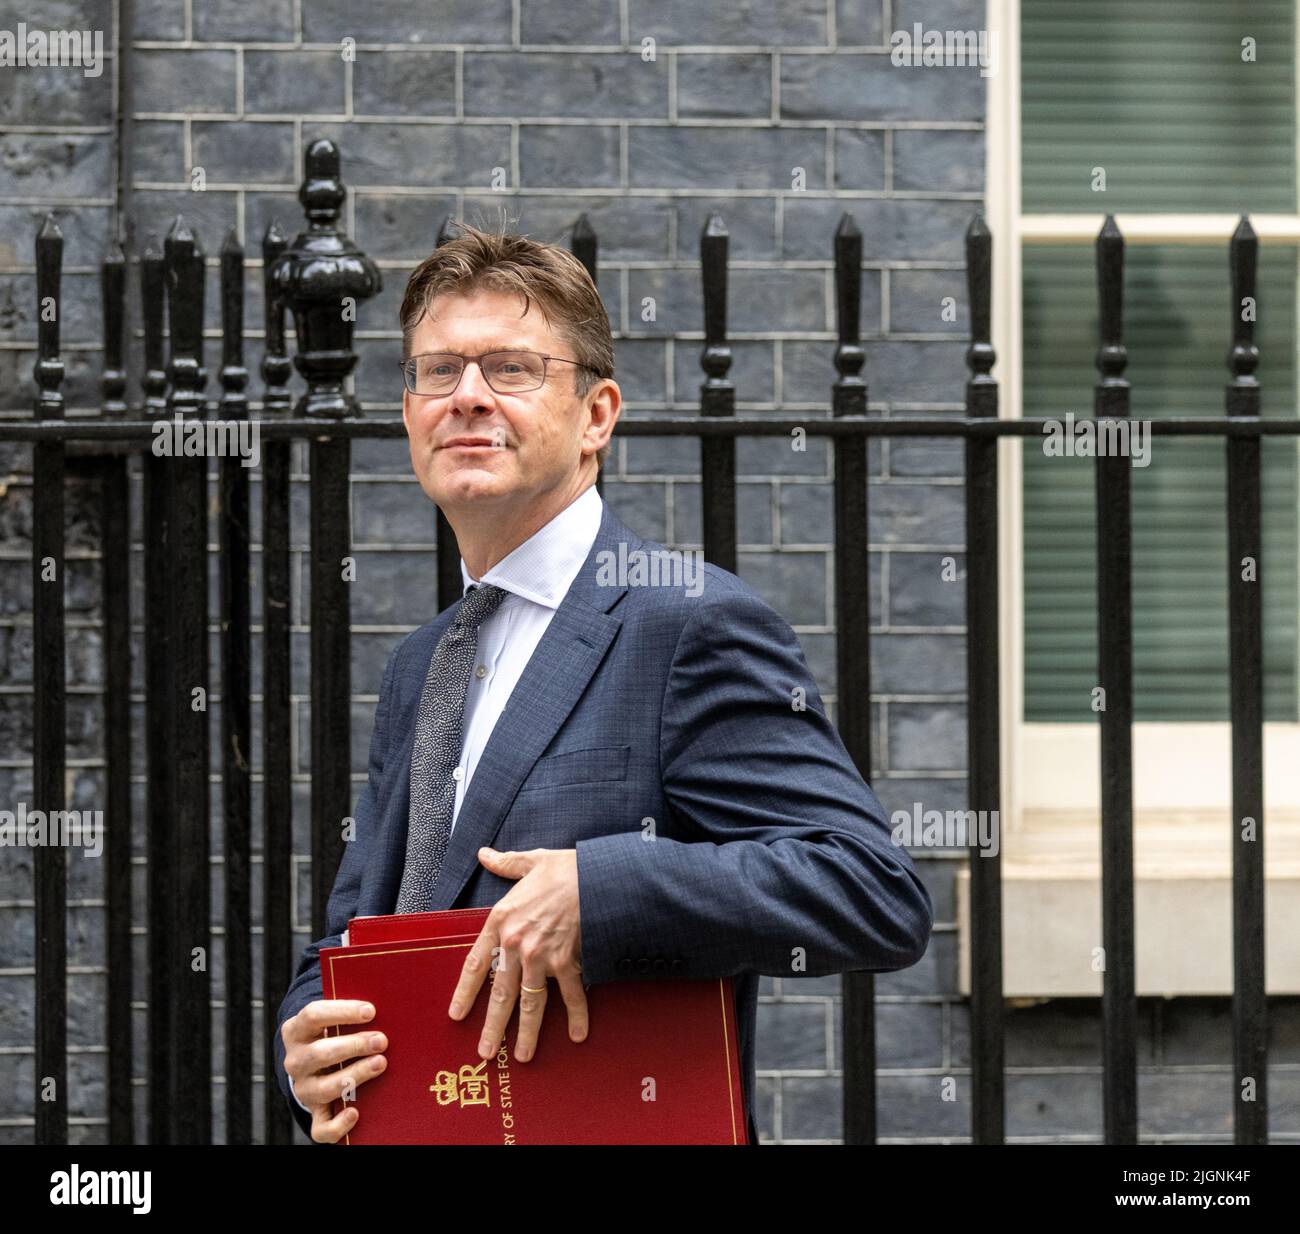 London, UK. 12th July, 2022. Greg Clarke, Secretary of State for Housing Communities and Local Government, at a cabinet meeting at 10 Downing Street London. Credit: Ian Davidson/Alamy Live News Stock Photo